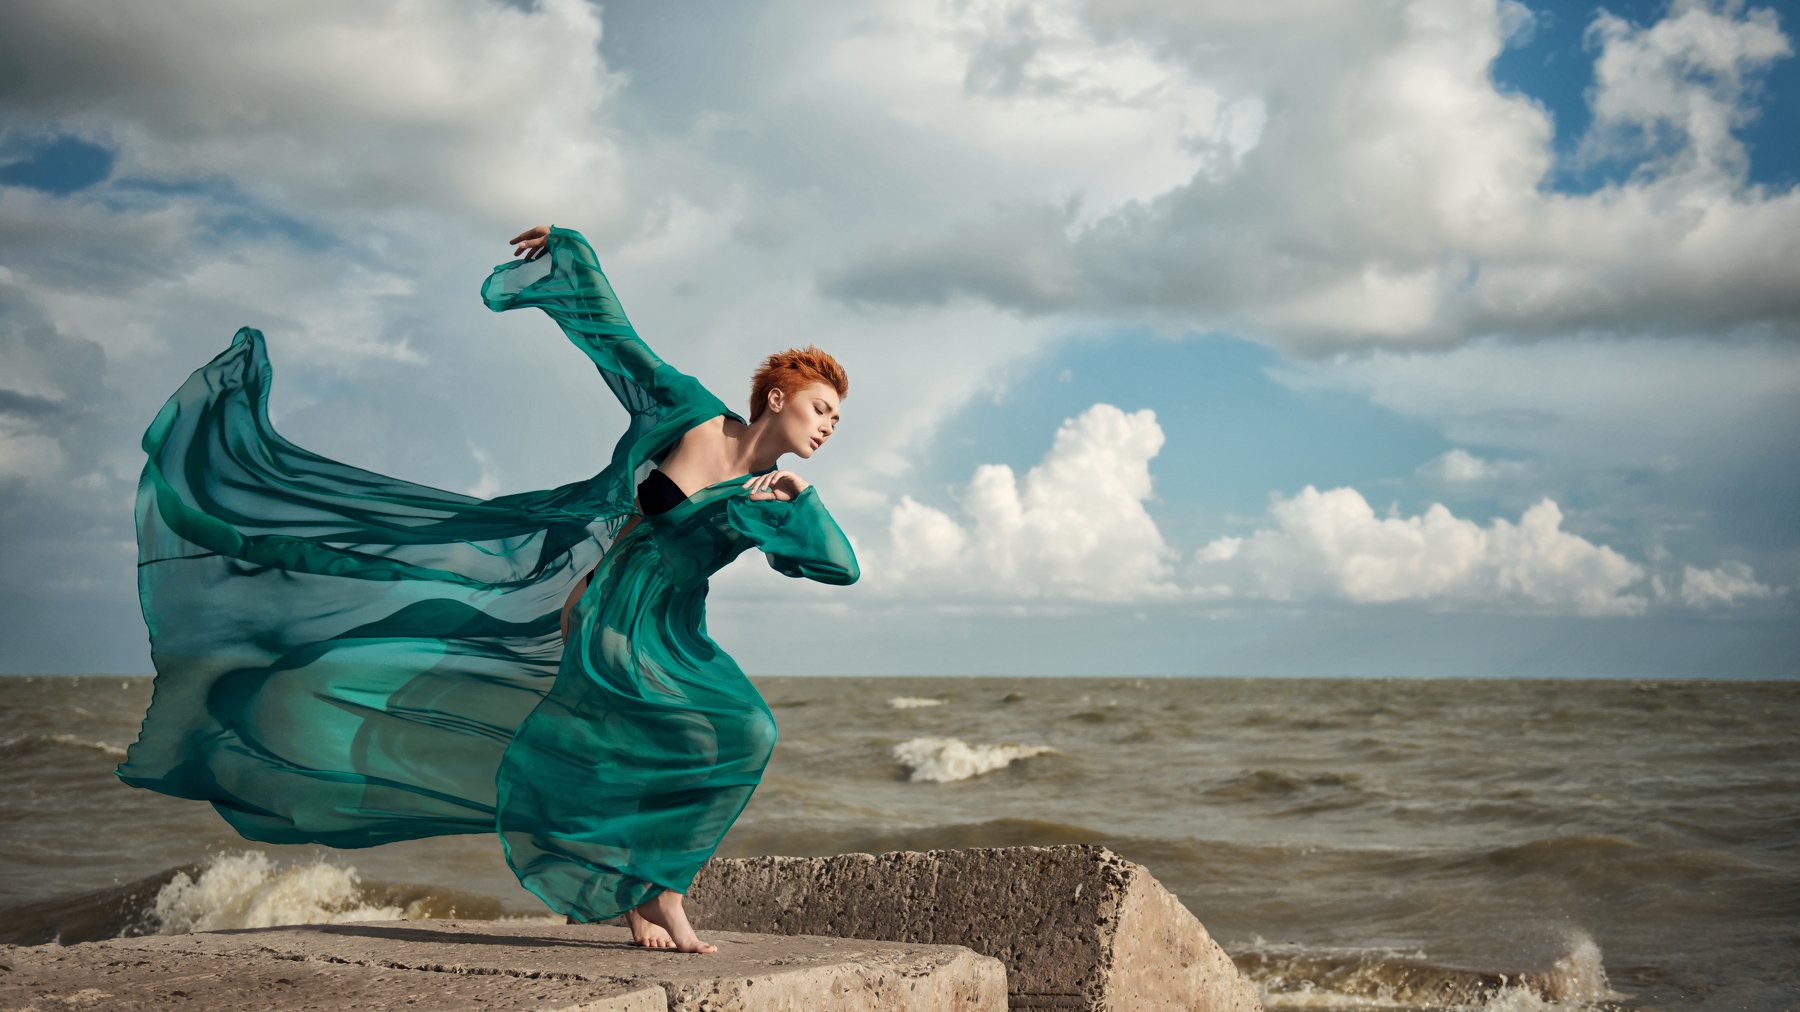 Girl, model, portrait, wind, coast, sea, waves, model tests, dynamics, nikon, russia, photographer Russia, blue, clouds, waves, red, Анна Дегтярёва